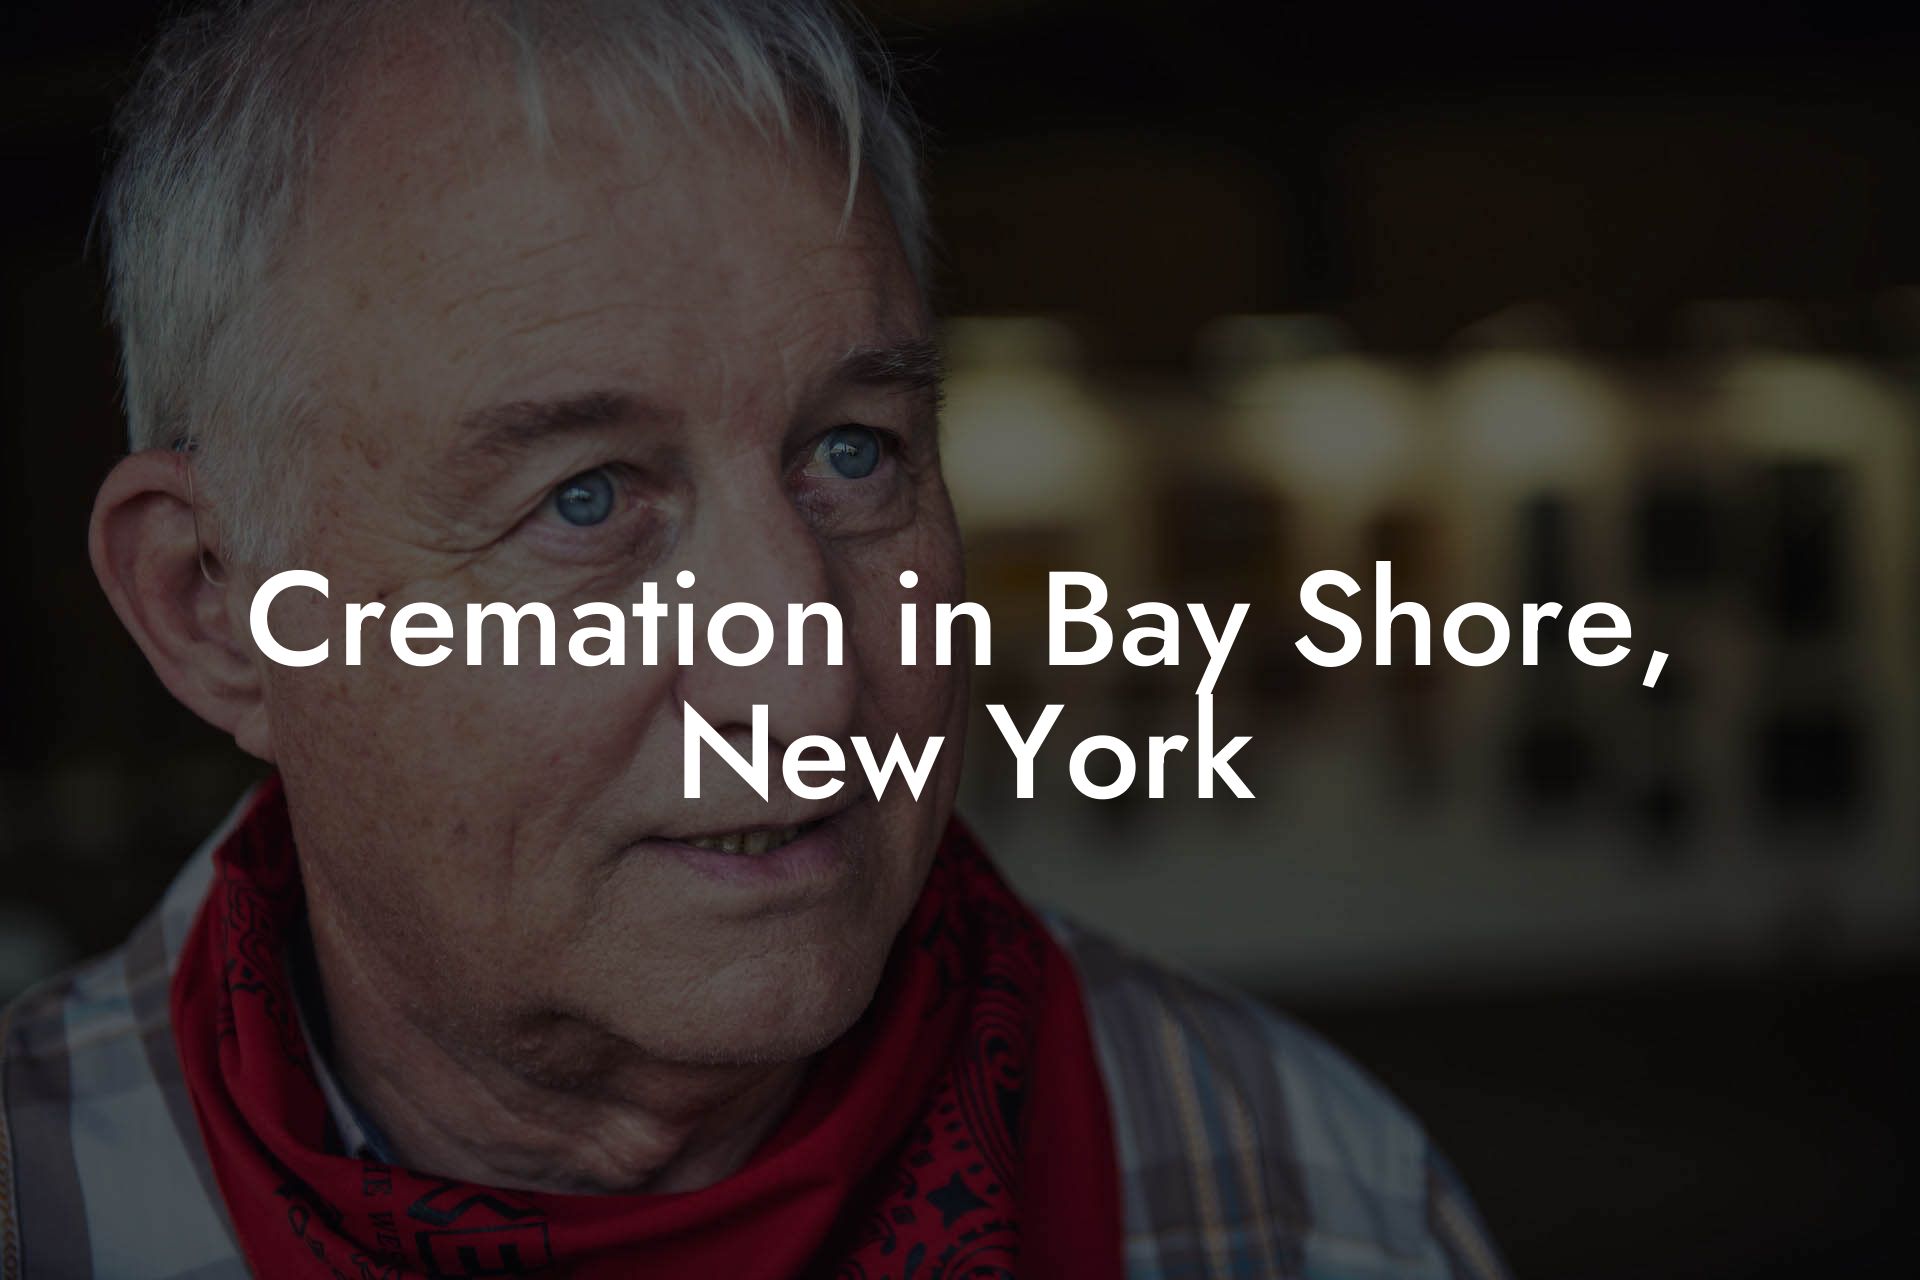 Cremation in Bay Shore, New York